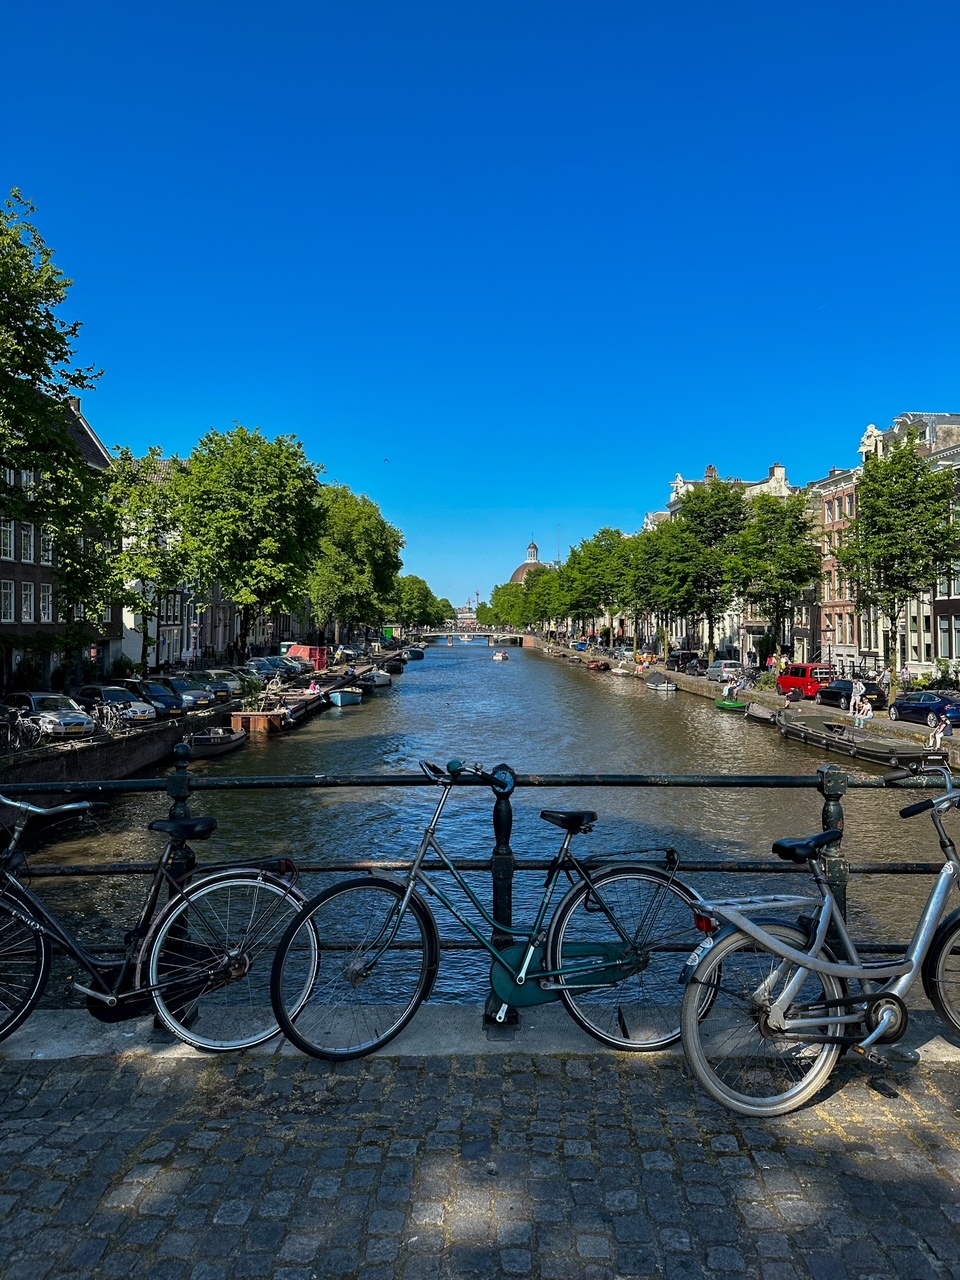 one of Amsterdam's charming canals